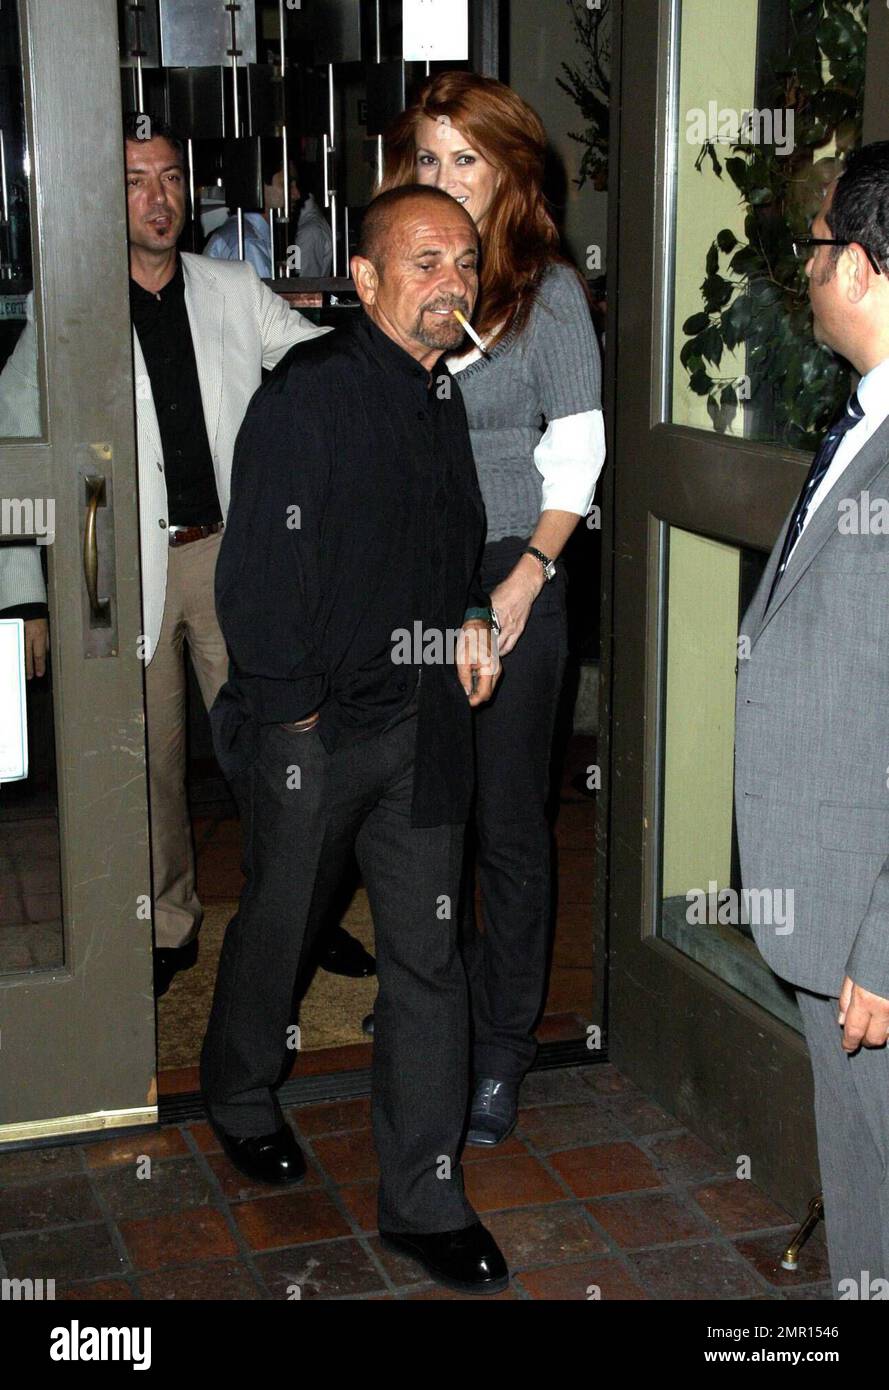 Exclusive!! It looks as if Angie Everhart and Joe Pesci are back together again as they leave the restaurant Ago. Everhart has reportedly accused ex-boyfriend, actor Chad Stansbury, of violently choking her during an incident in August. But, according to the reports, the LA County District Attorney rejected the case after it decided there wasn't enough evidence to prosecute. Angie told the cops that Stansbury choked her during a heated argument and fled the scene. He was then arrested and booked on suspicion of domestic violence. Los Angeles, CA. 10/2/08. All Stock Photo